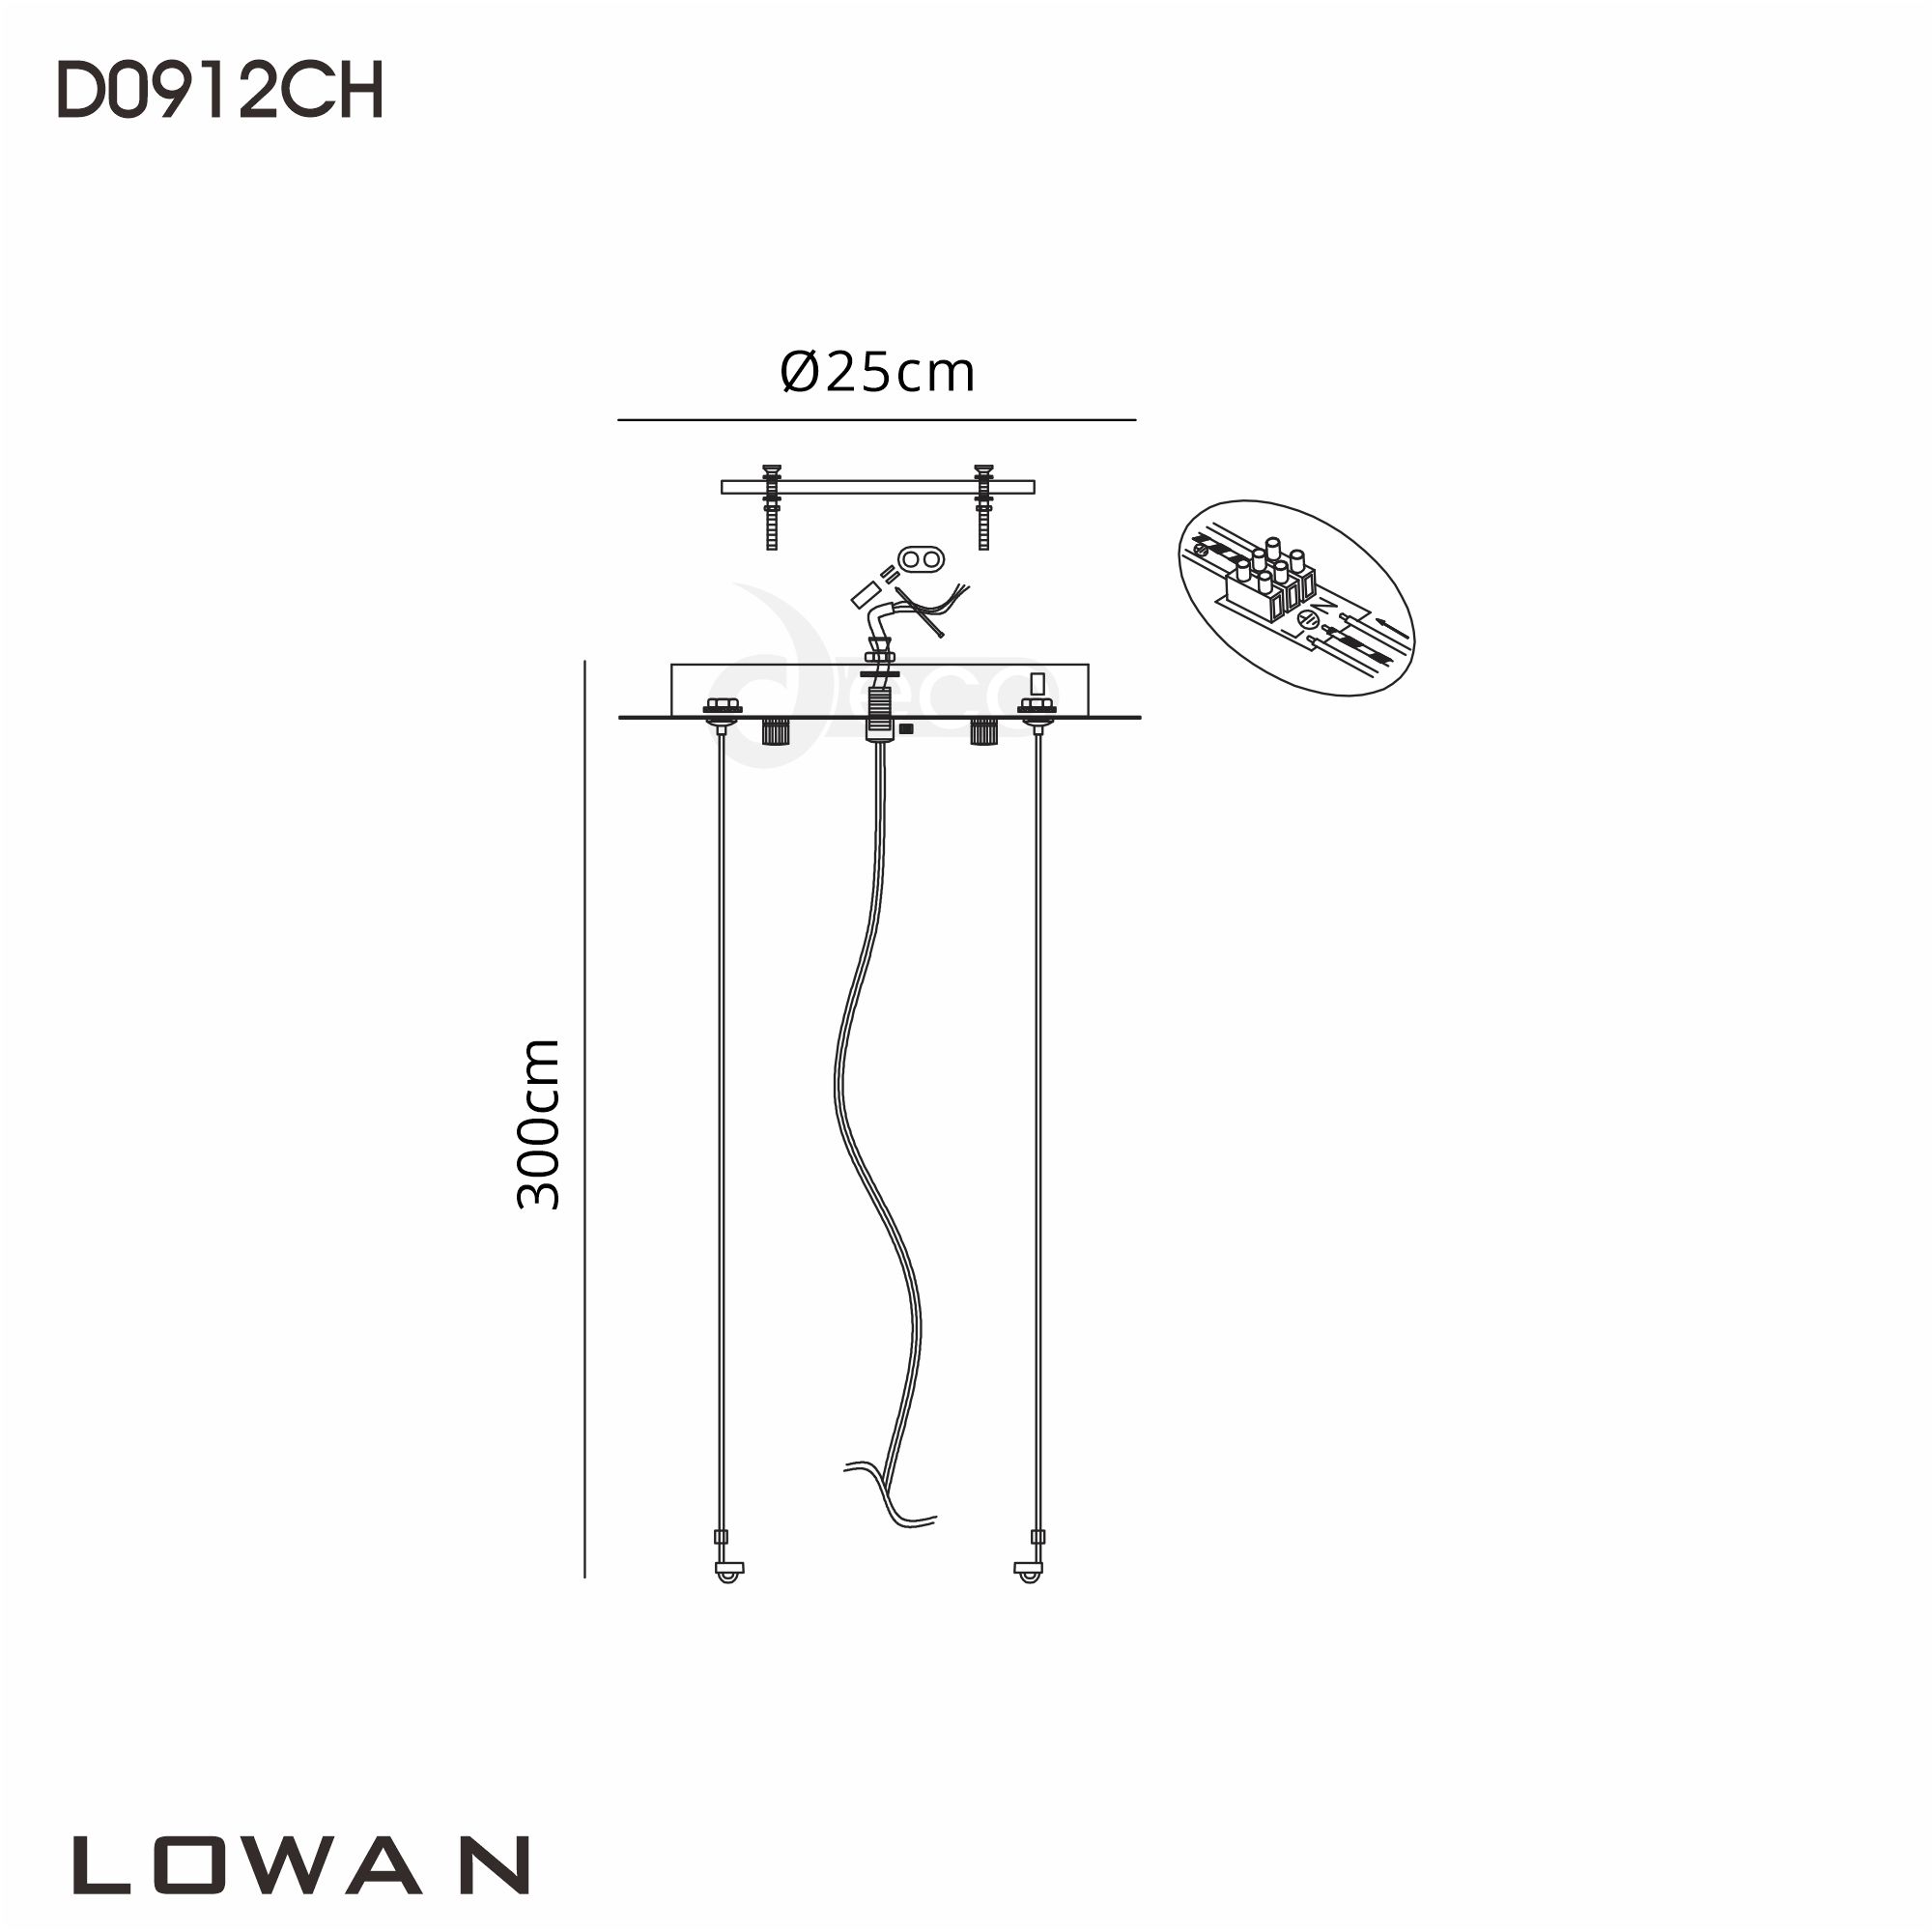 D0939CH/SI  Lowan 890mm, 3m Suspension Plate c/w Power Cable To Lower Flush Fittings, Polished Chrome/Silver Max Load 40kg (ONLY TESTED FOR OUR RANGE OF PRODUCTS)